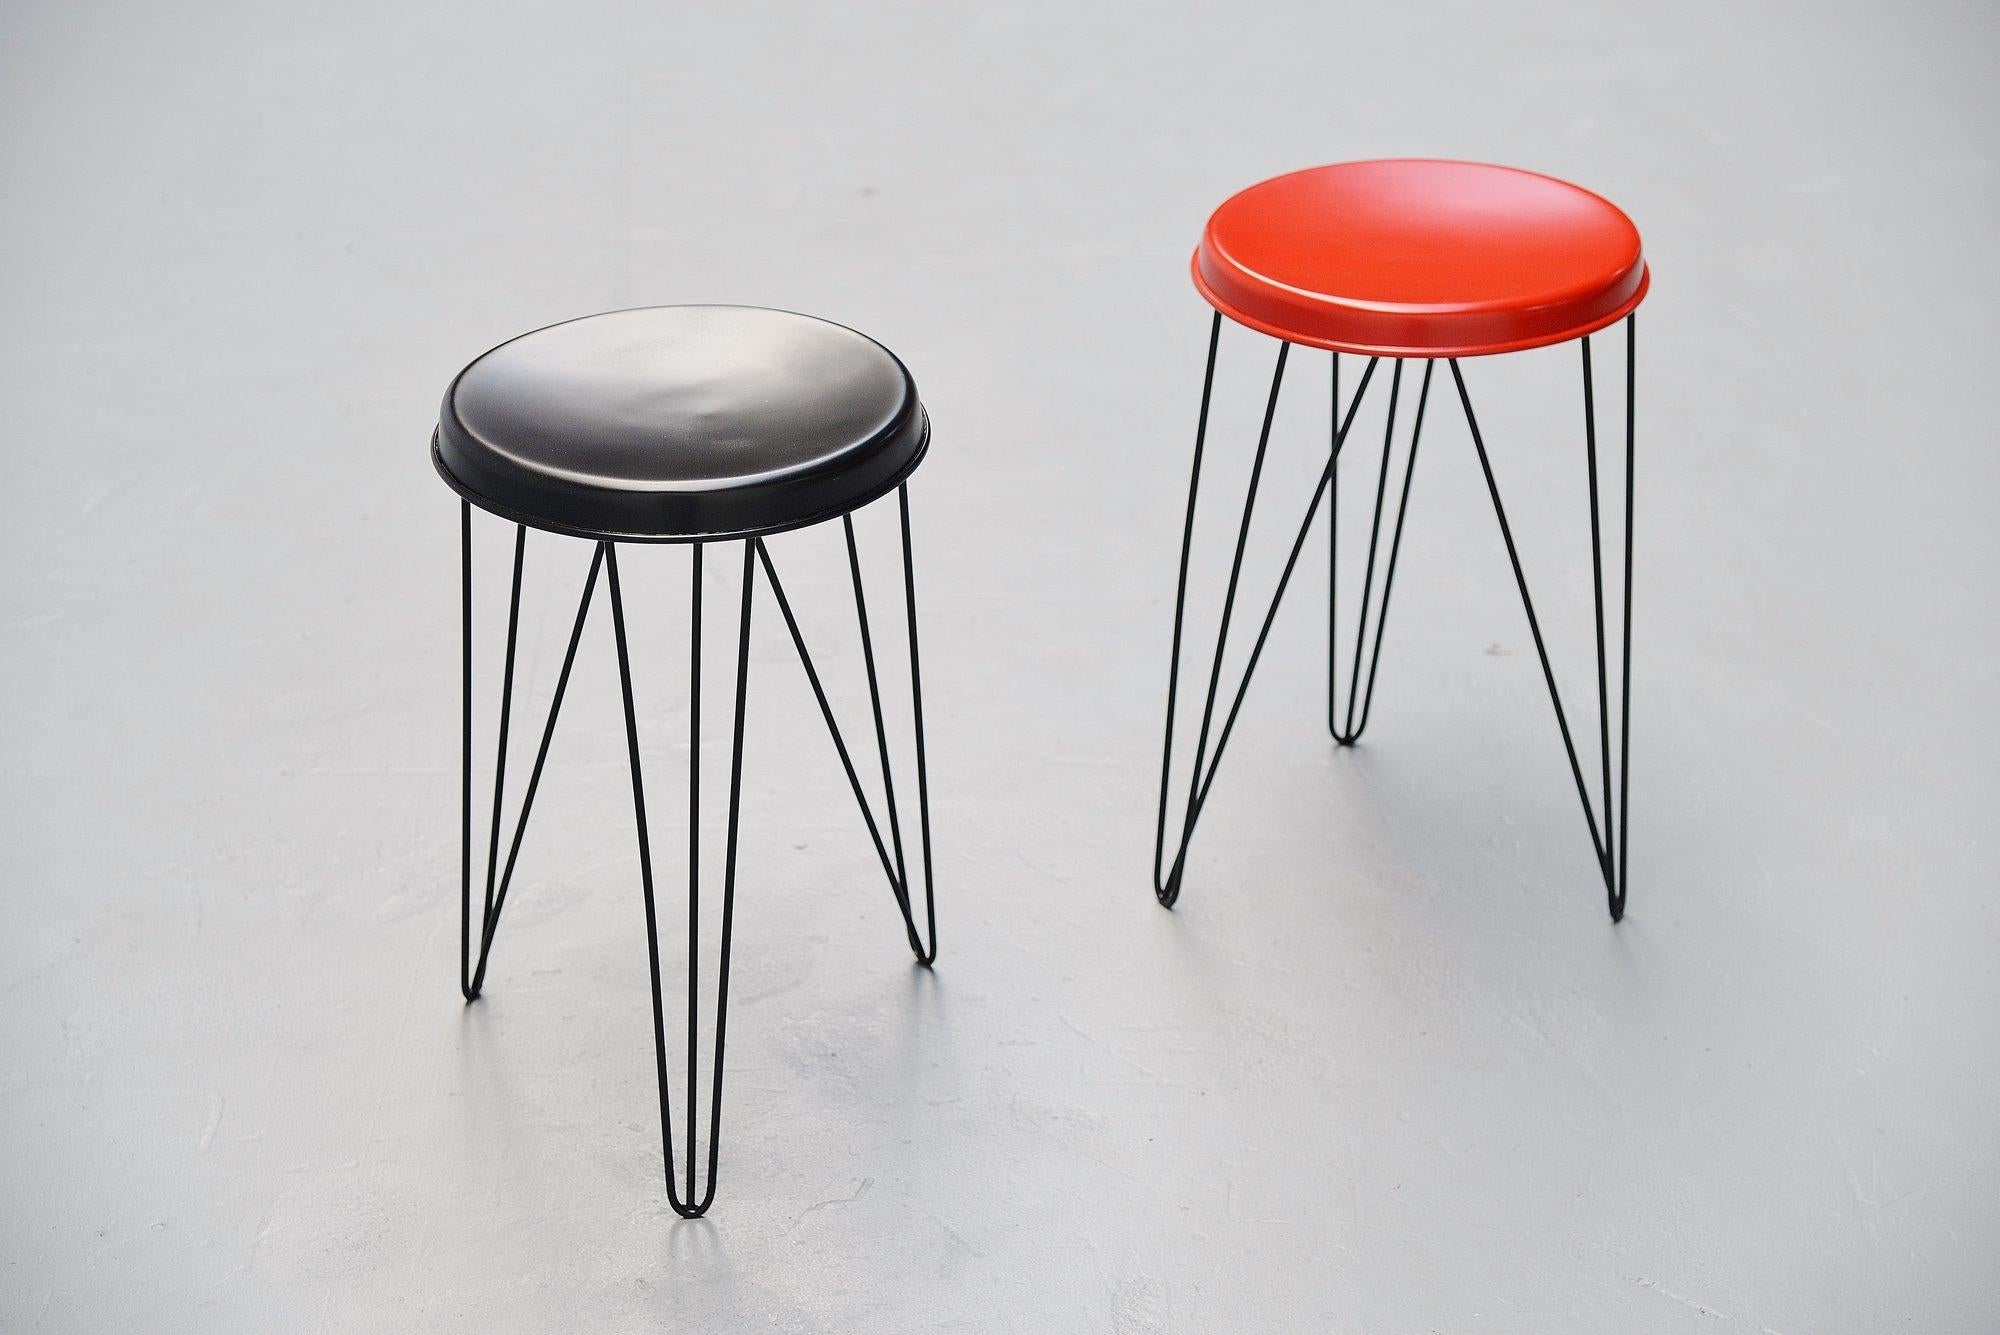 Pair of Industrial stools designed by Tjerk Reijenga and manufactured by Pilastro, Holland 1960. These stools have a black painted metal wire frame and red and black seats. The stools have been professionally refinished in the original colors with